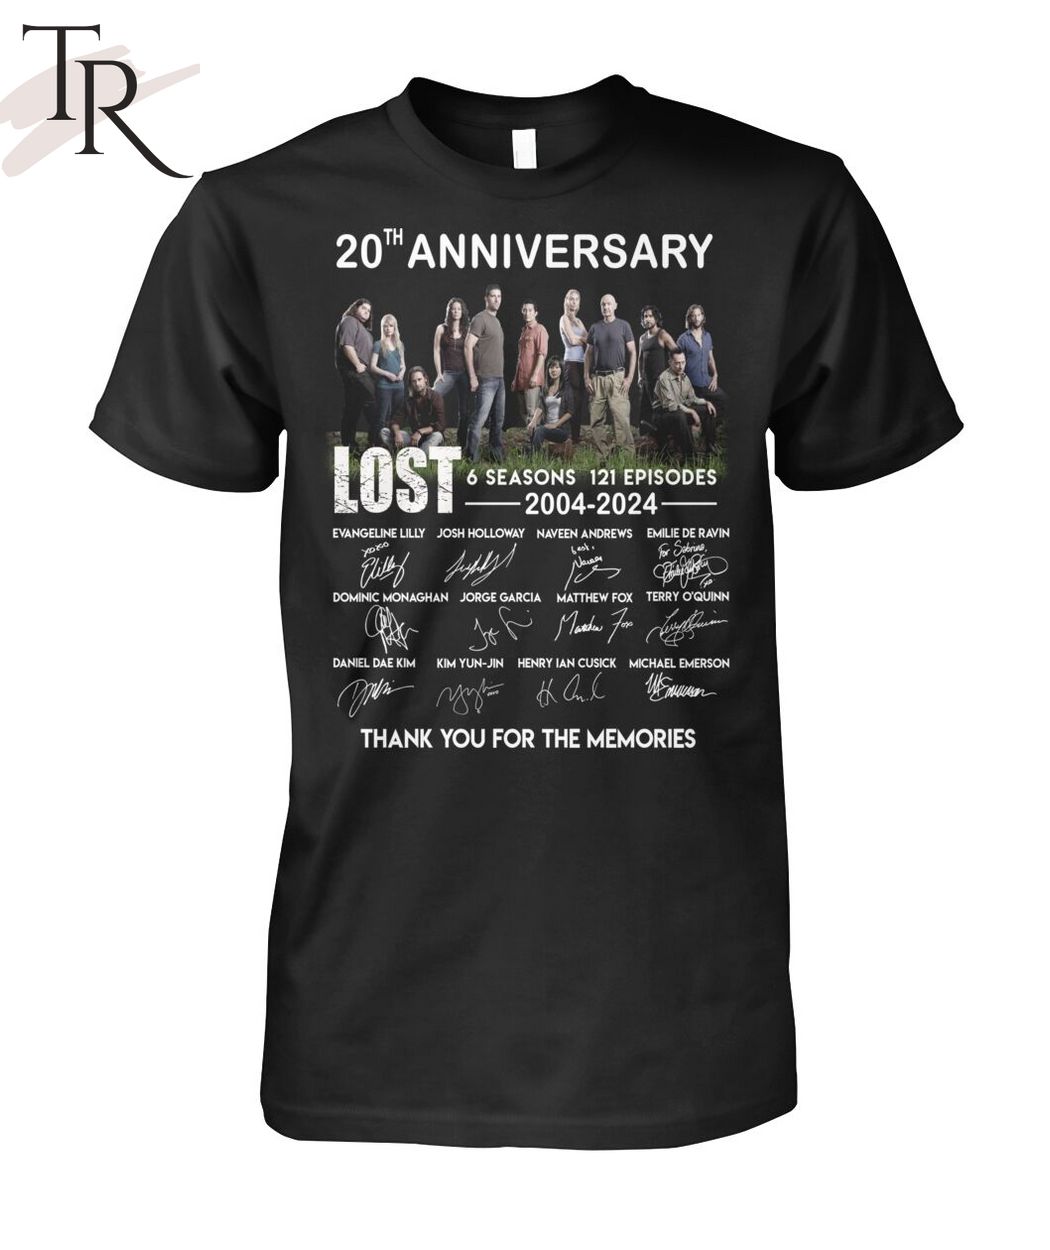 20th Anniversary LOST 6 Seasons 121 Episodes 2004-2024 Thank You For The Memories T-Shirt